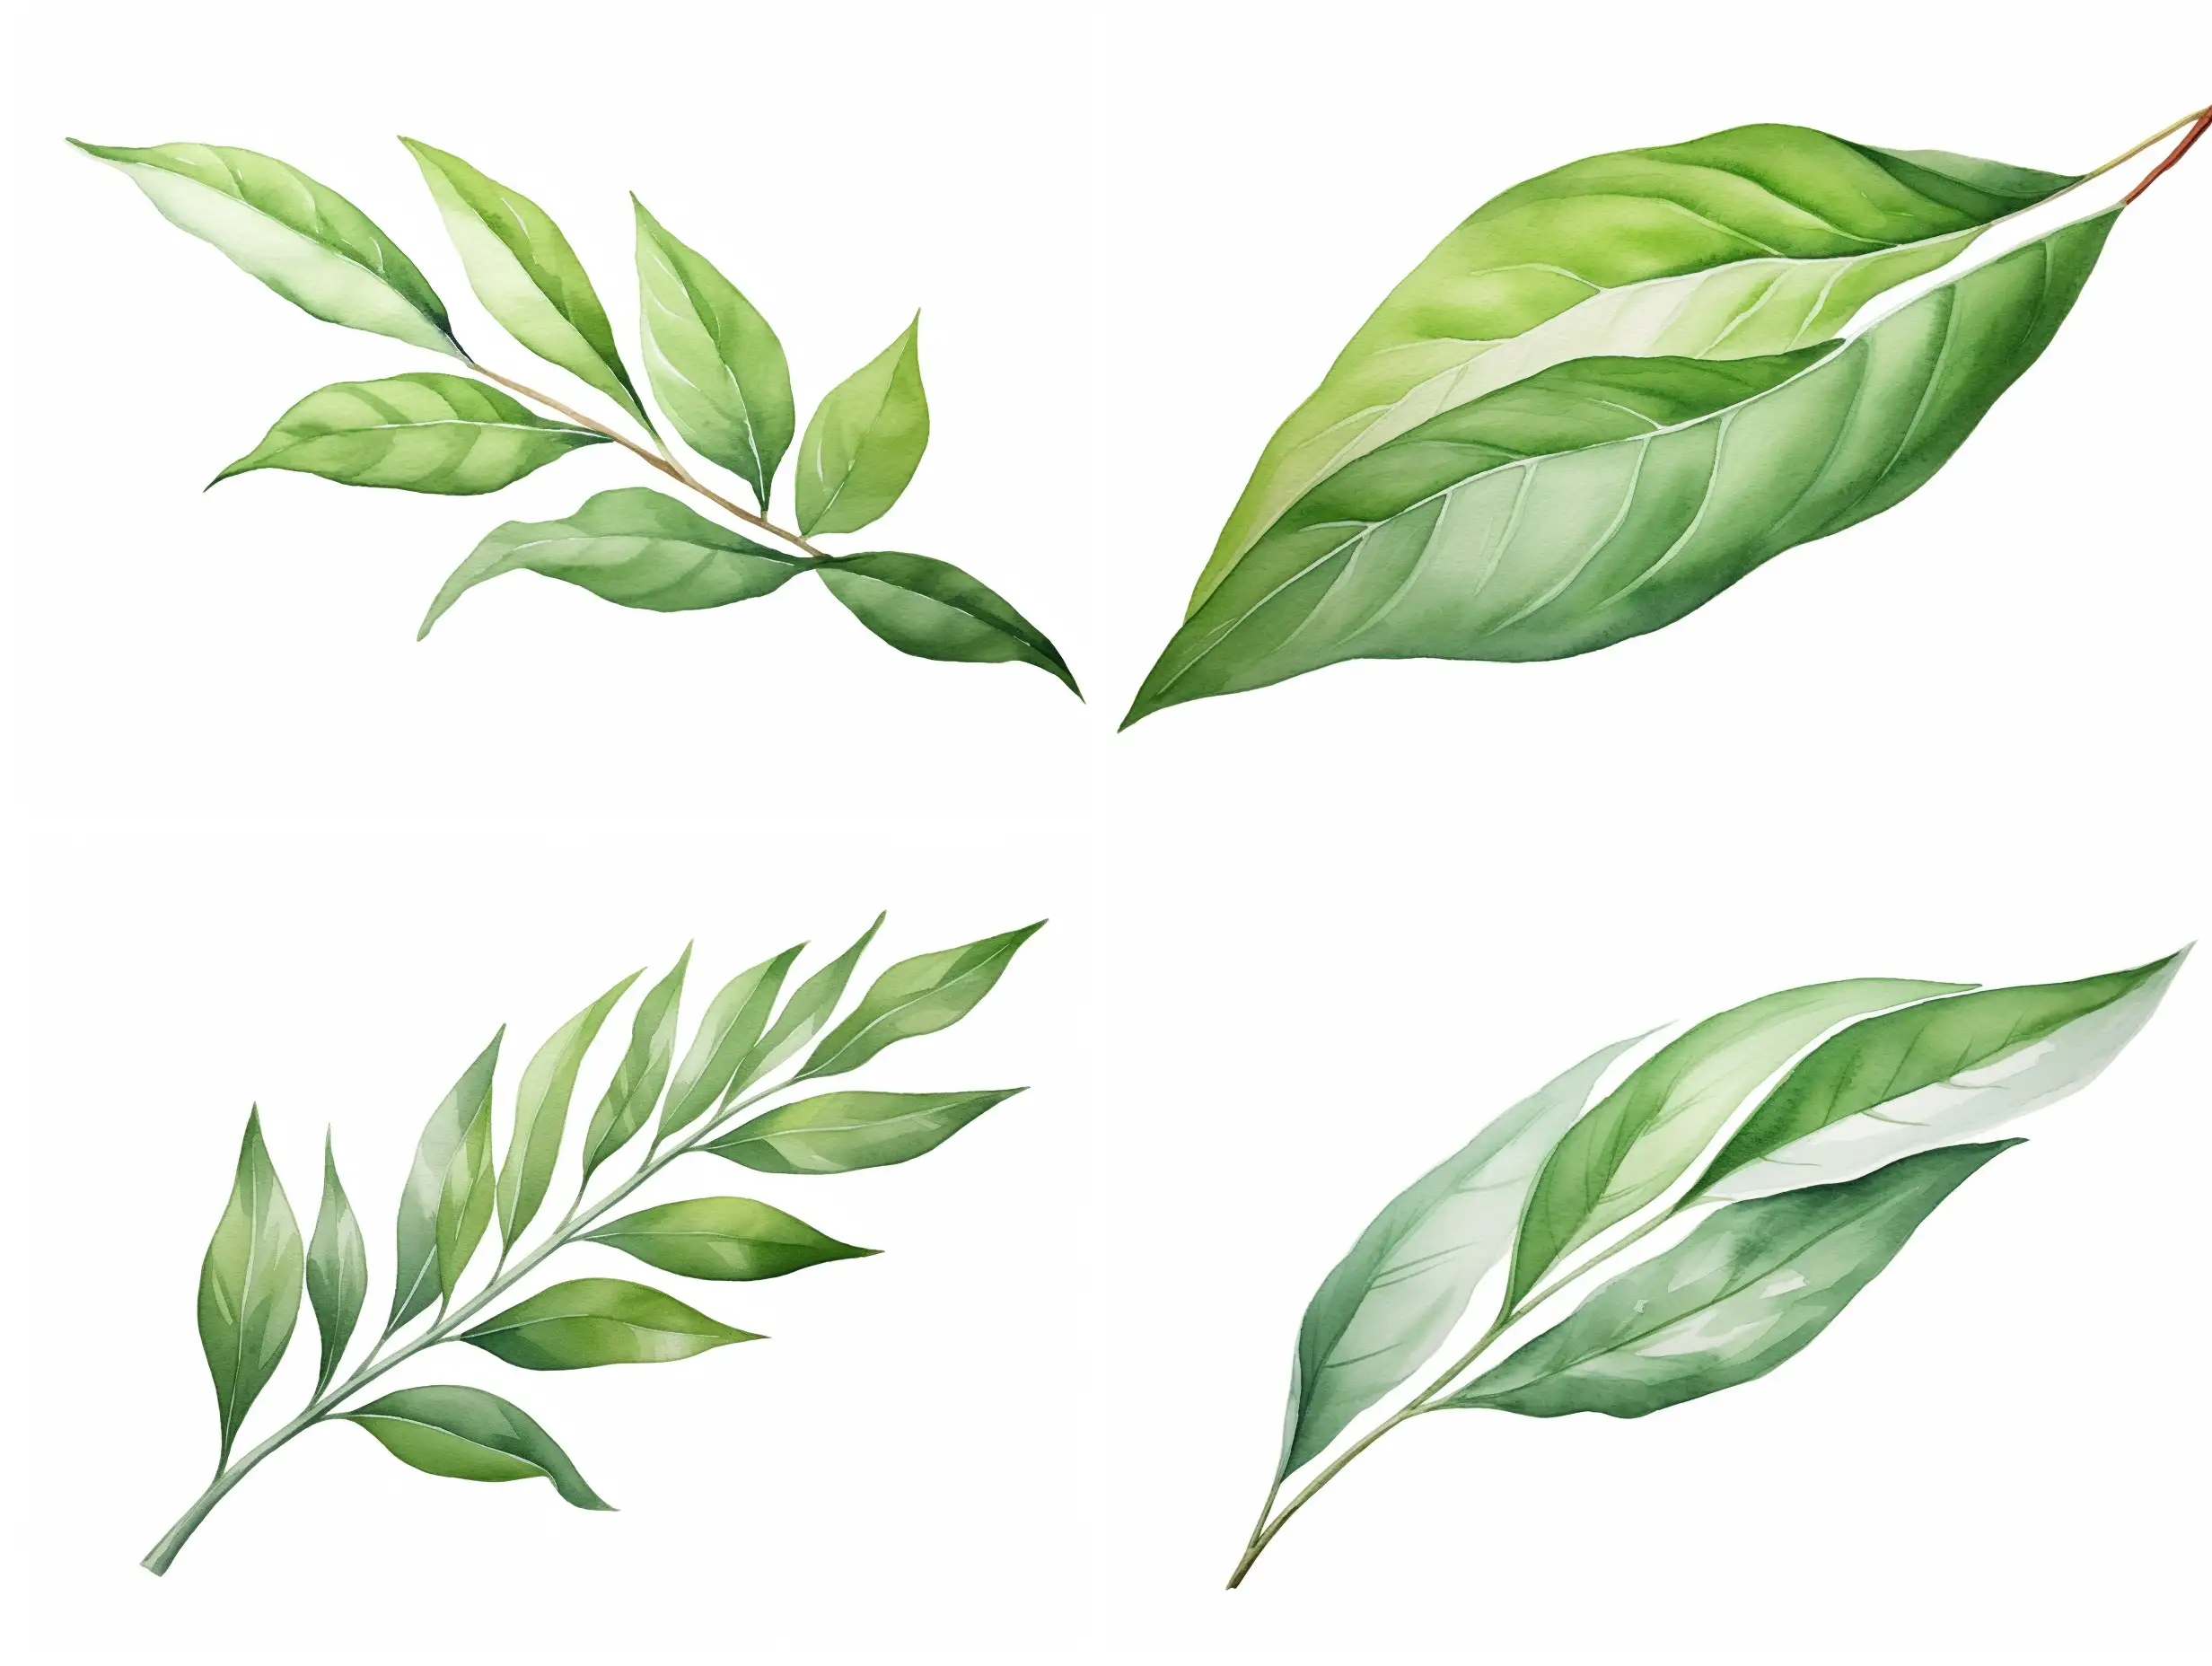 Watercolor green tea leaf illustration isolated on white background